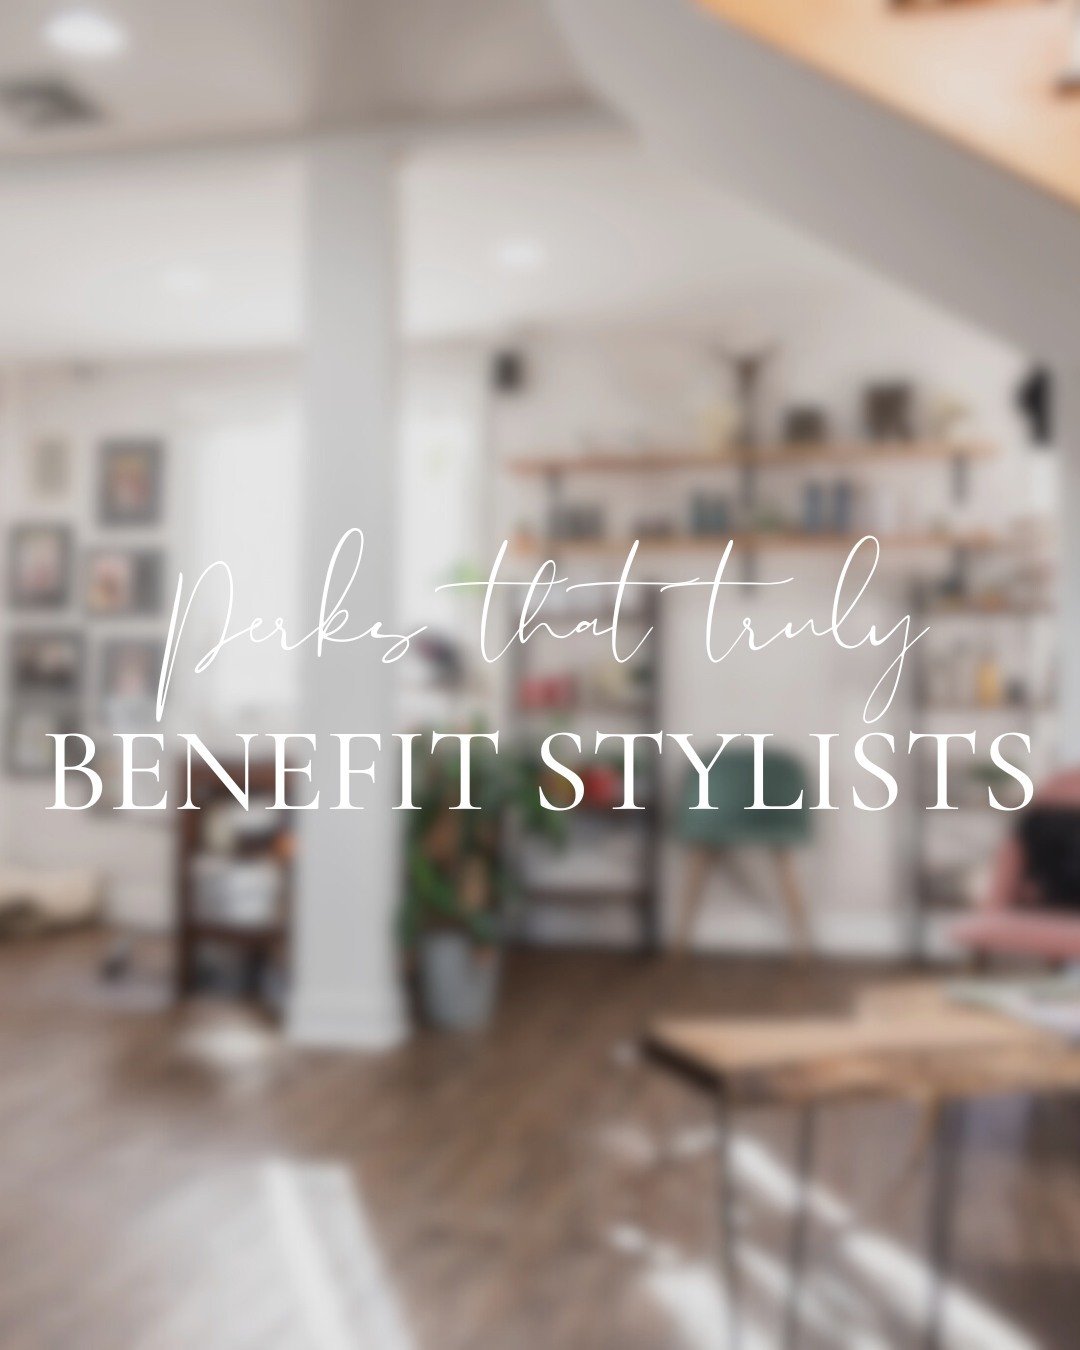 At Alchemy, The Salon we offer benefits that truly make an impact on your career.

We offer stylists a commission structure with booth rental flexibility, and the ability to always be able to advance your career!

Schedule a hangout and discuss what 